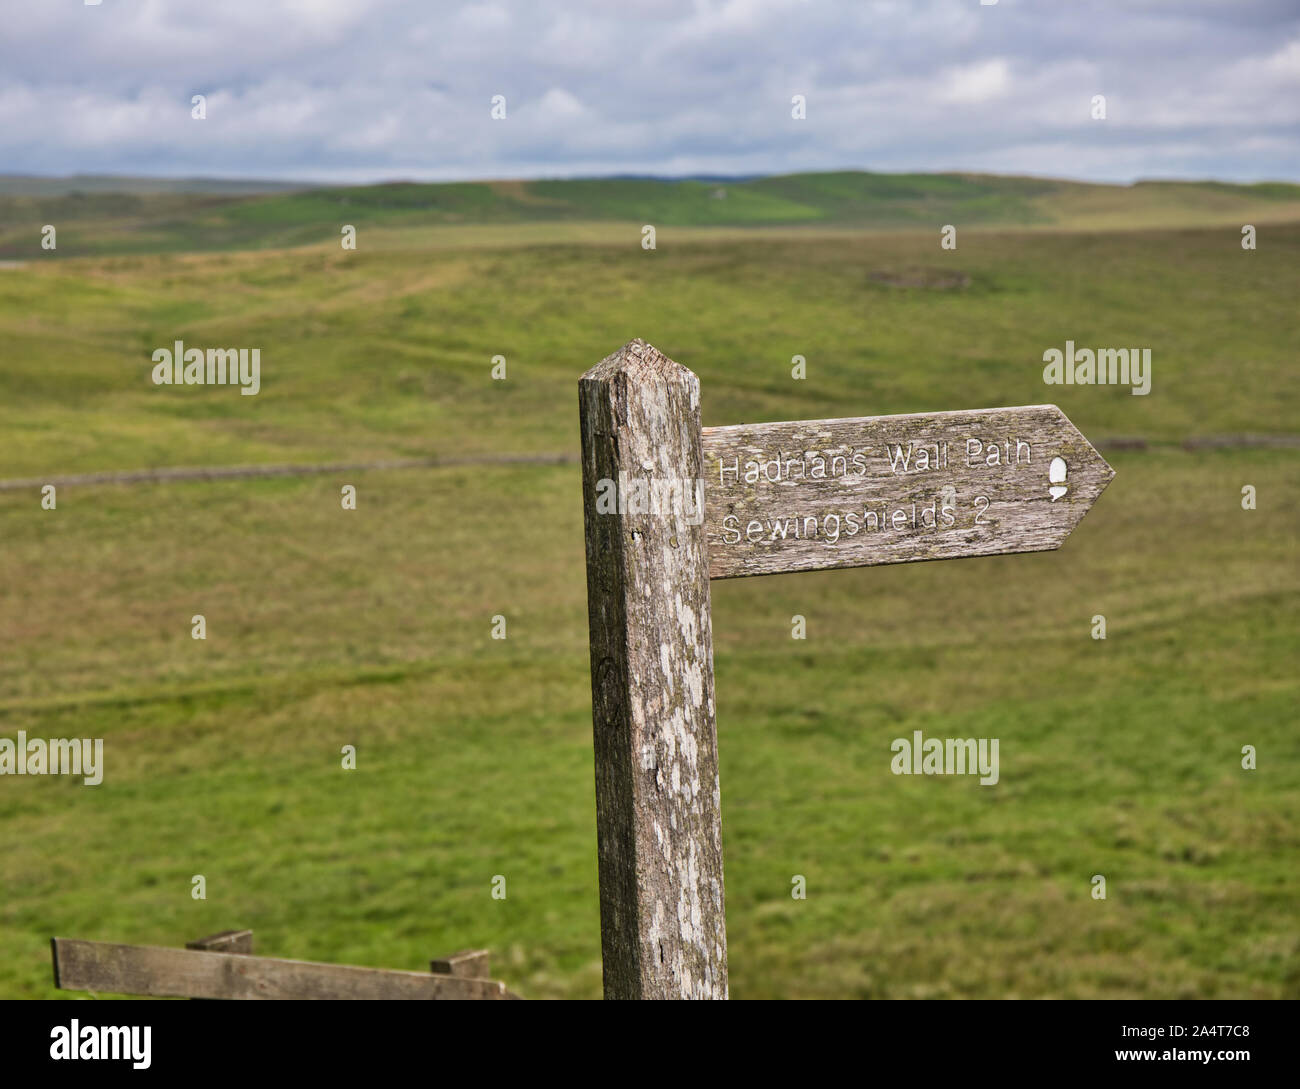 Wooden sign pointing to Hadrian's Wall path at Housesteads Roman Fort, Hadrian's Wall, Northumberland, England Stock Photo